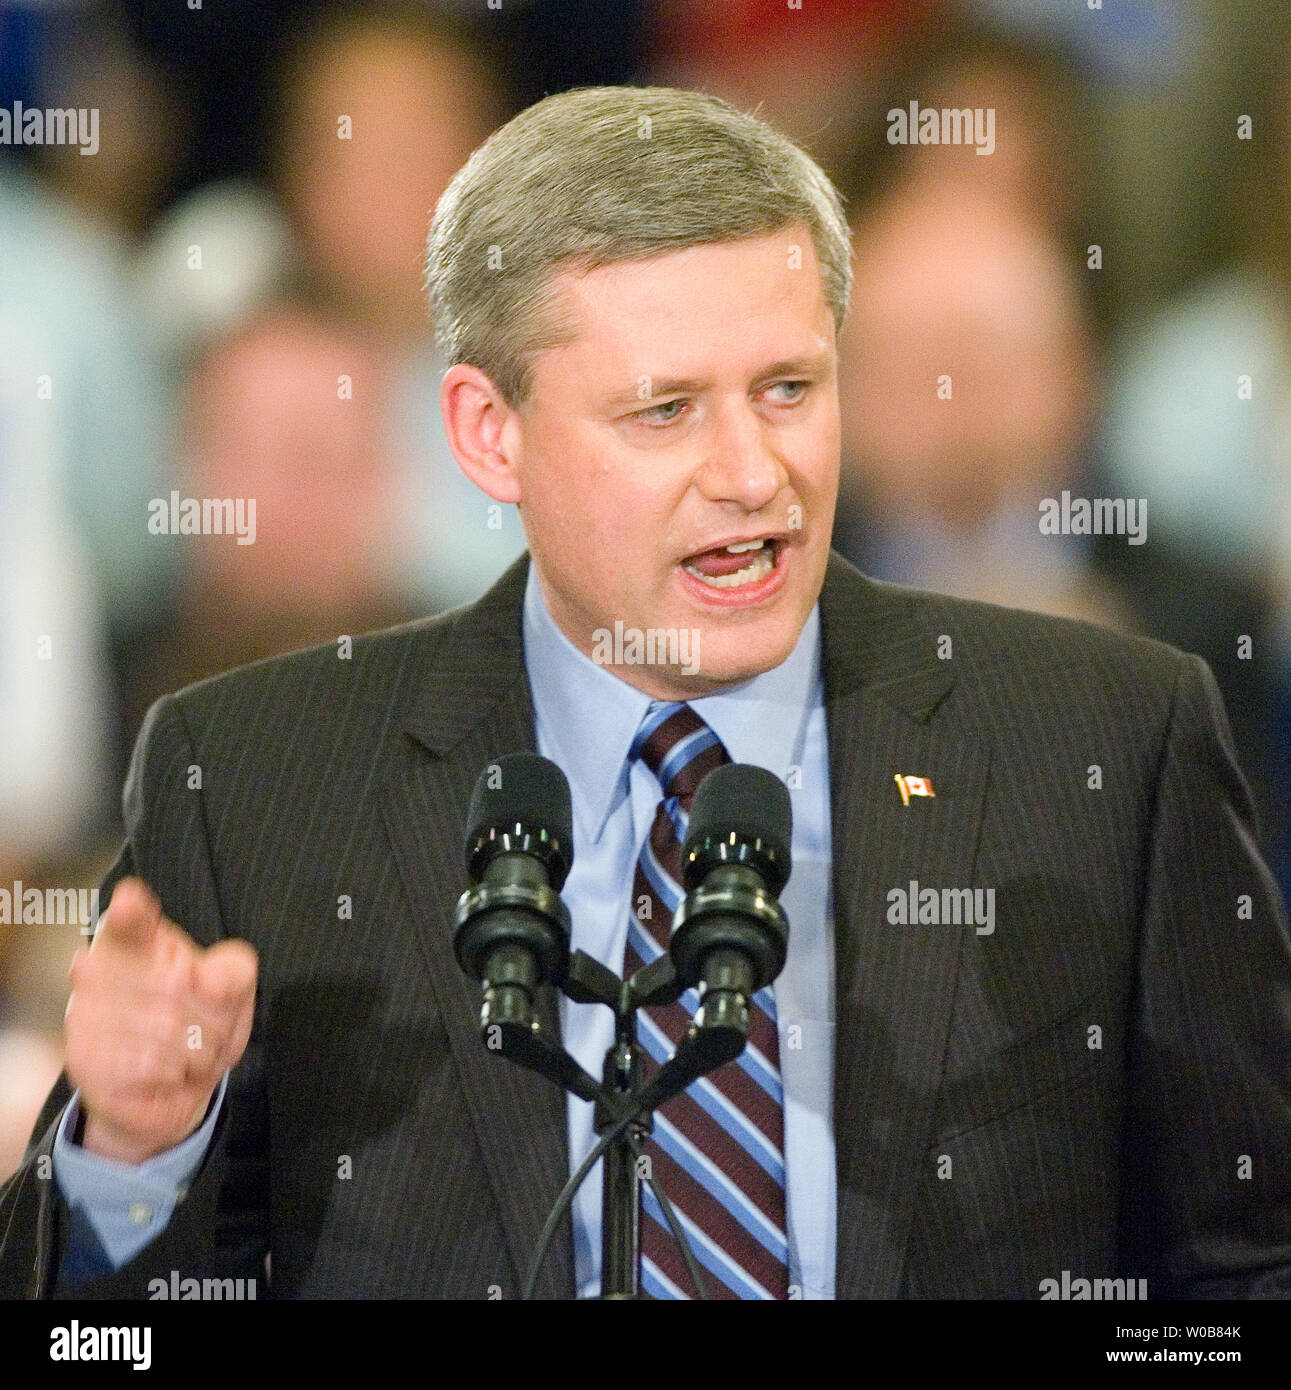 Federal Conservative leader Prime Minister Stephen Harper speaks to supporters in Vancouver, British Columbia, during a federal election campaign stop October 8, 2008.   (UPI Photo/Heinz Ruckemann) Stock Photo